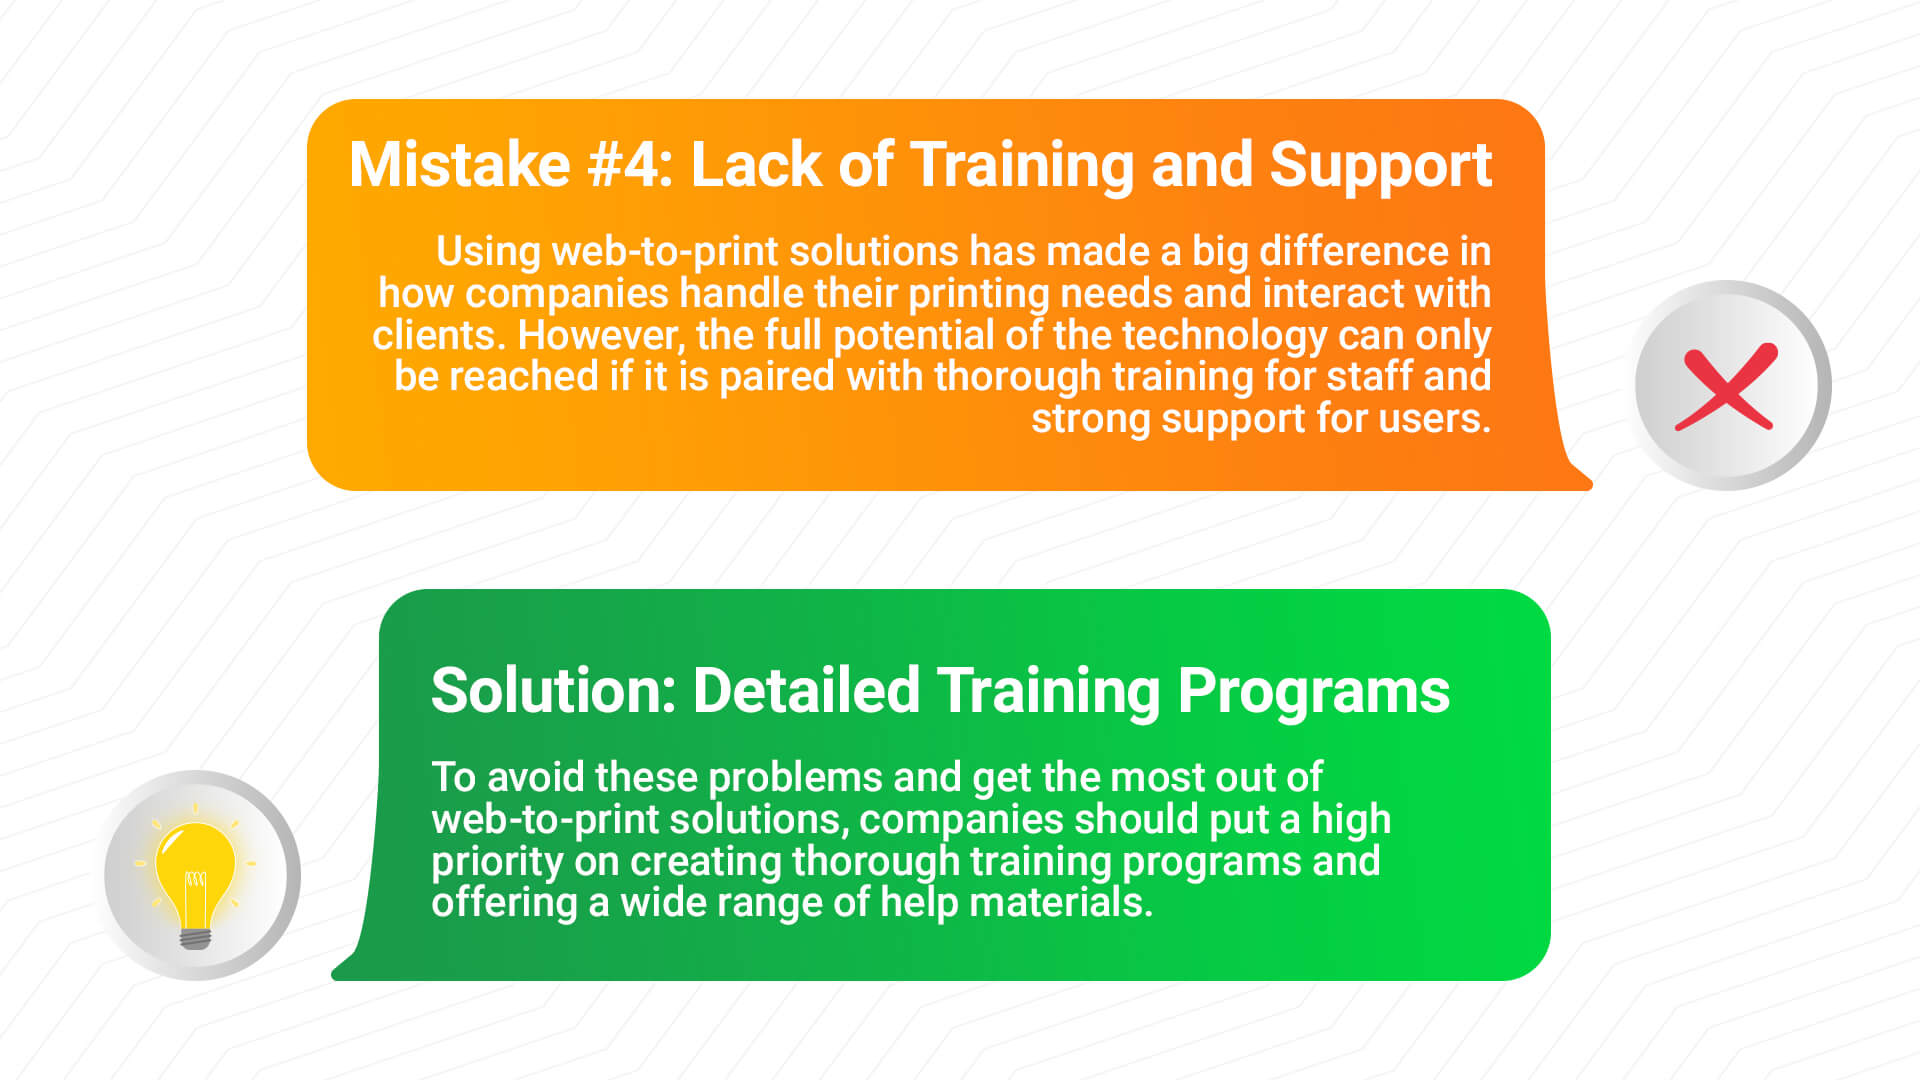 Mistake #4: Lack of Training and Support